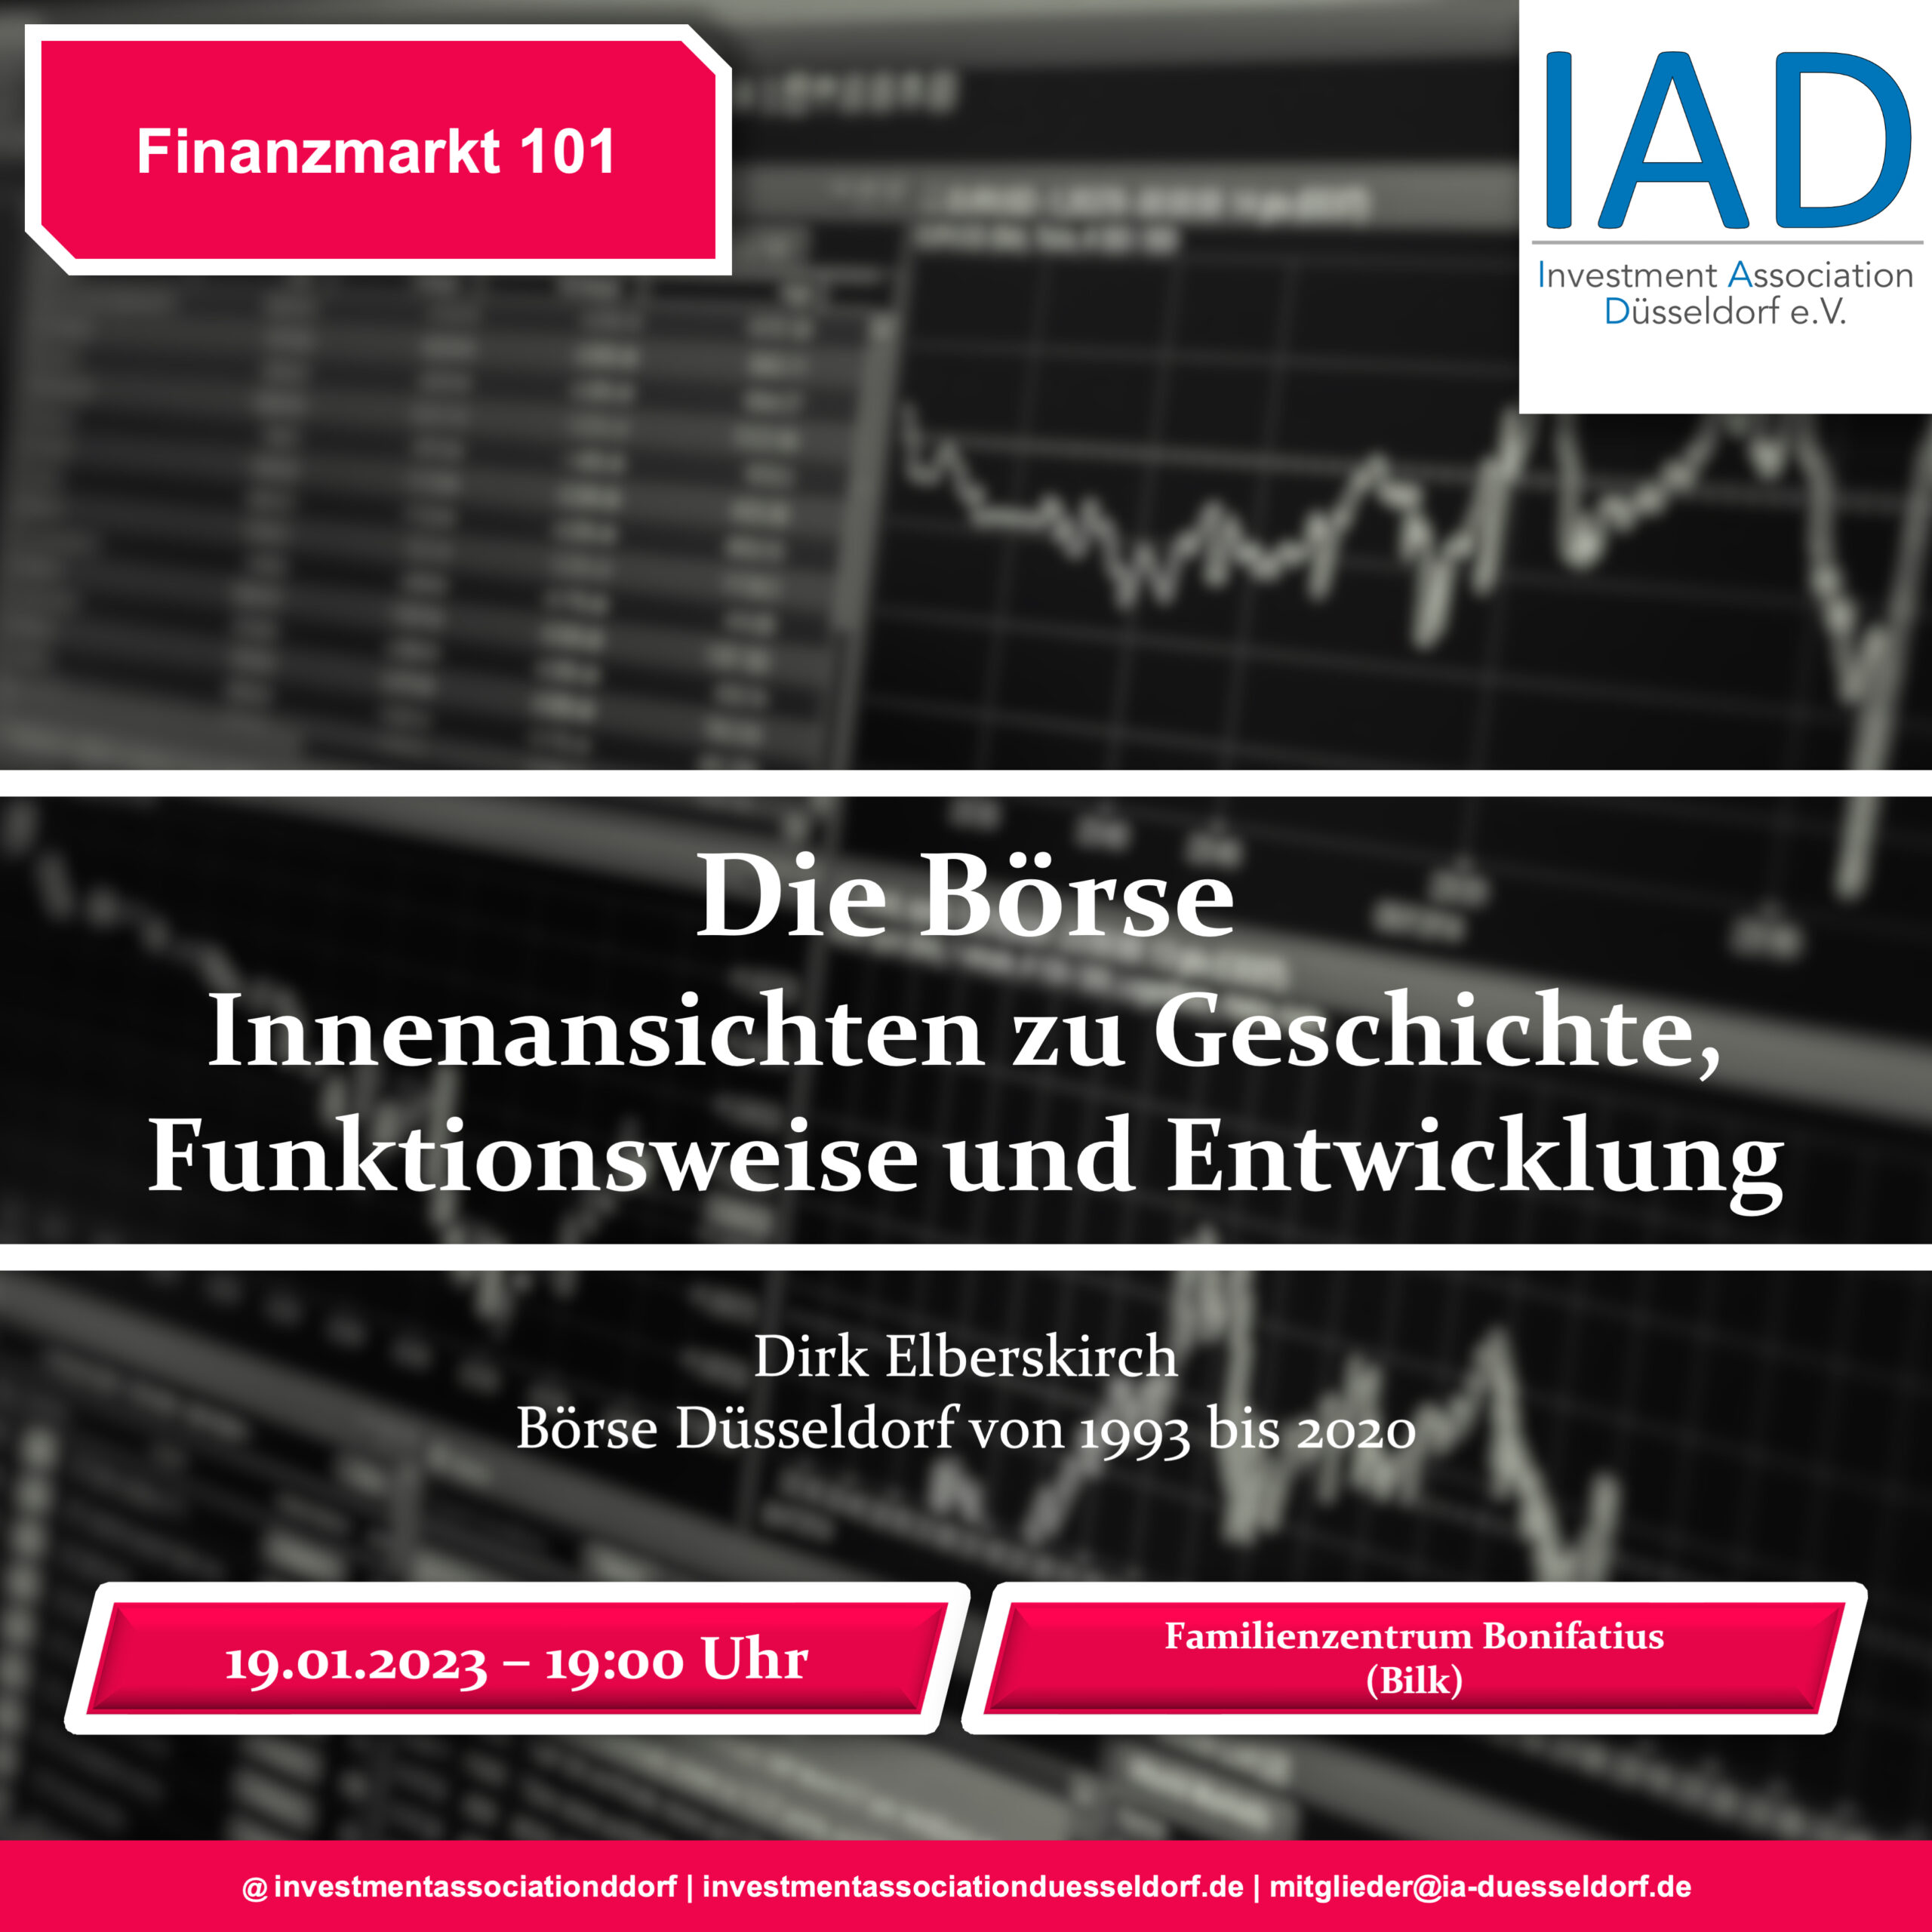 You are currently viewing Finanzmarkt 101 (19.01.2023 – 19:00 Uhr)